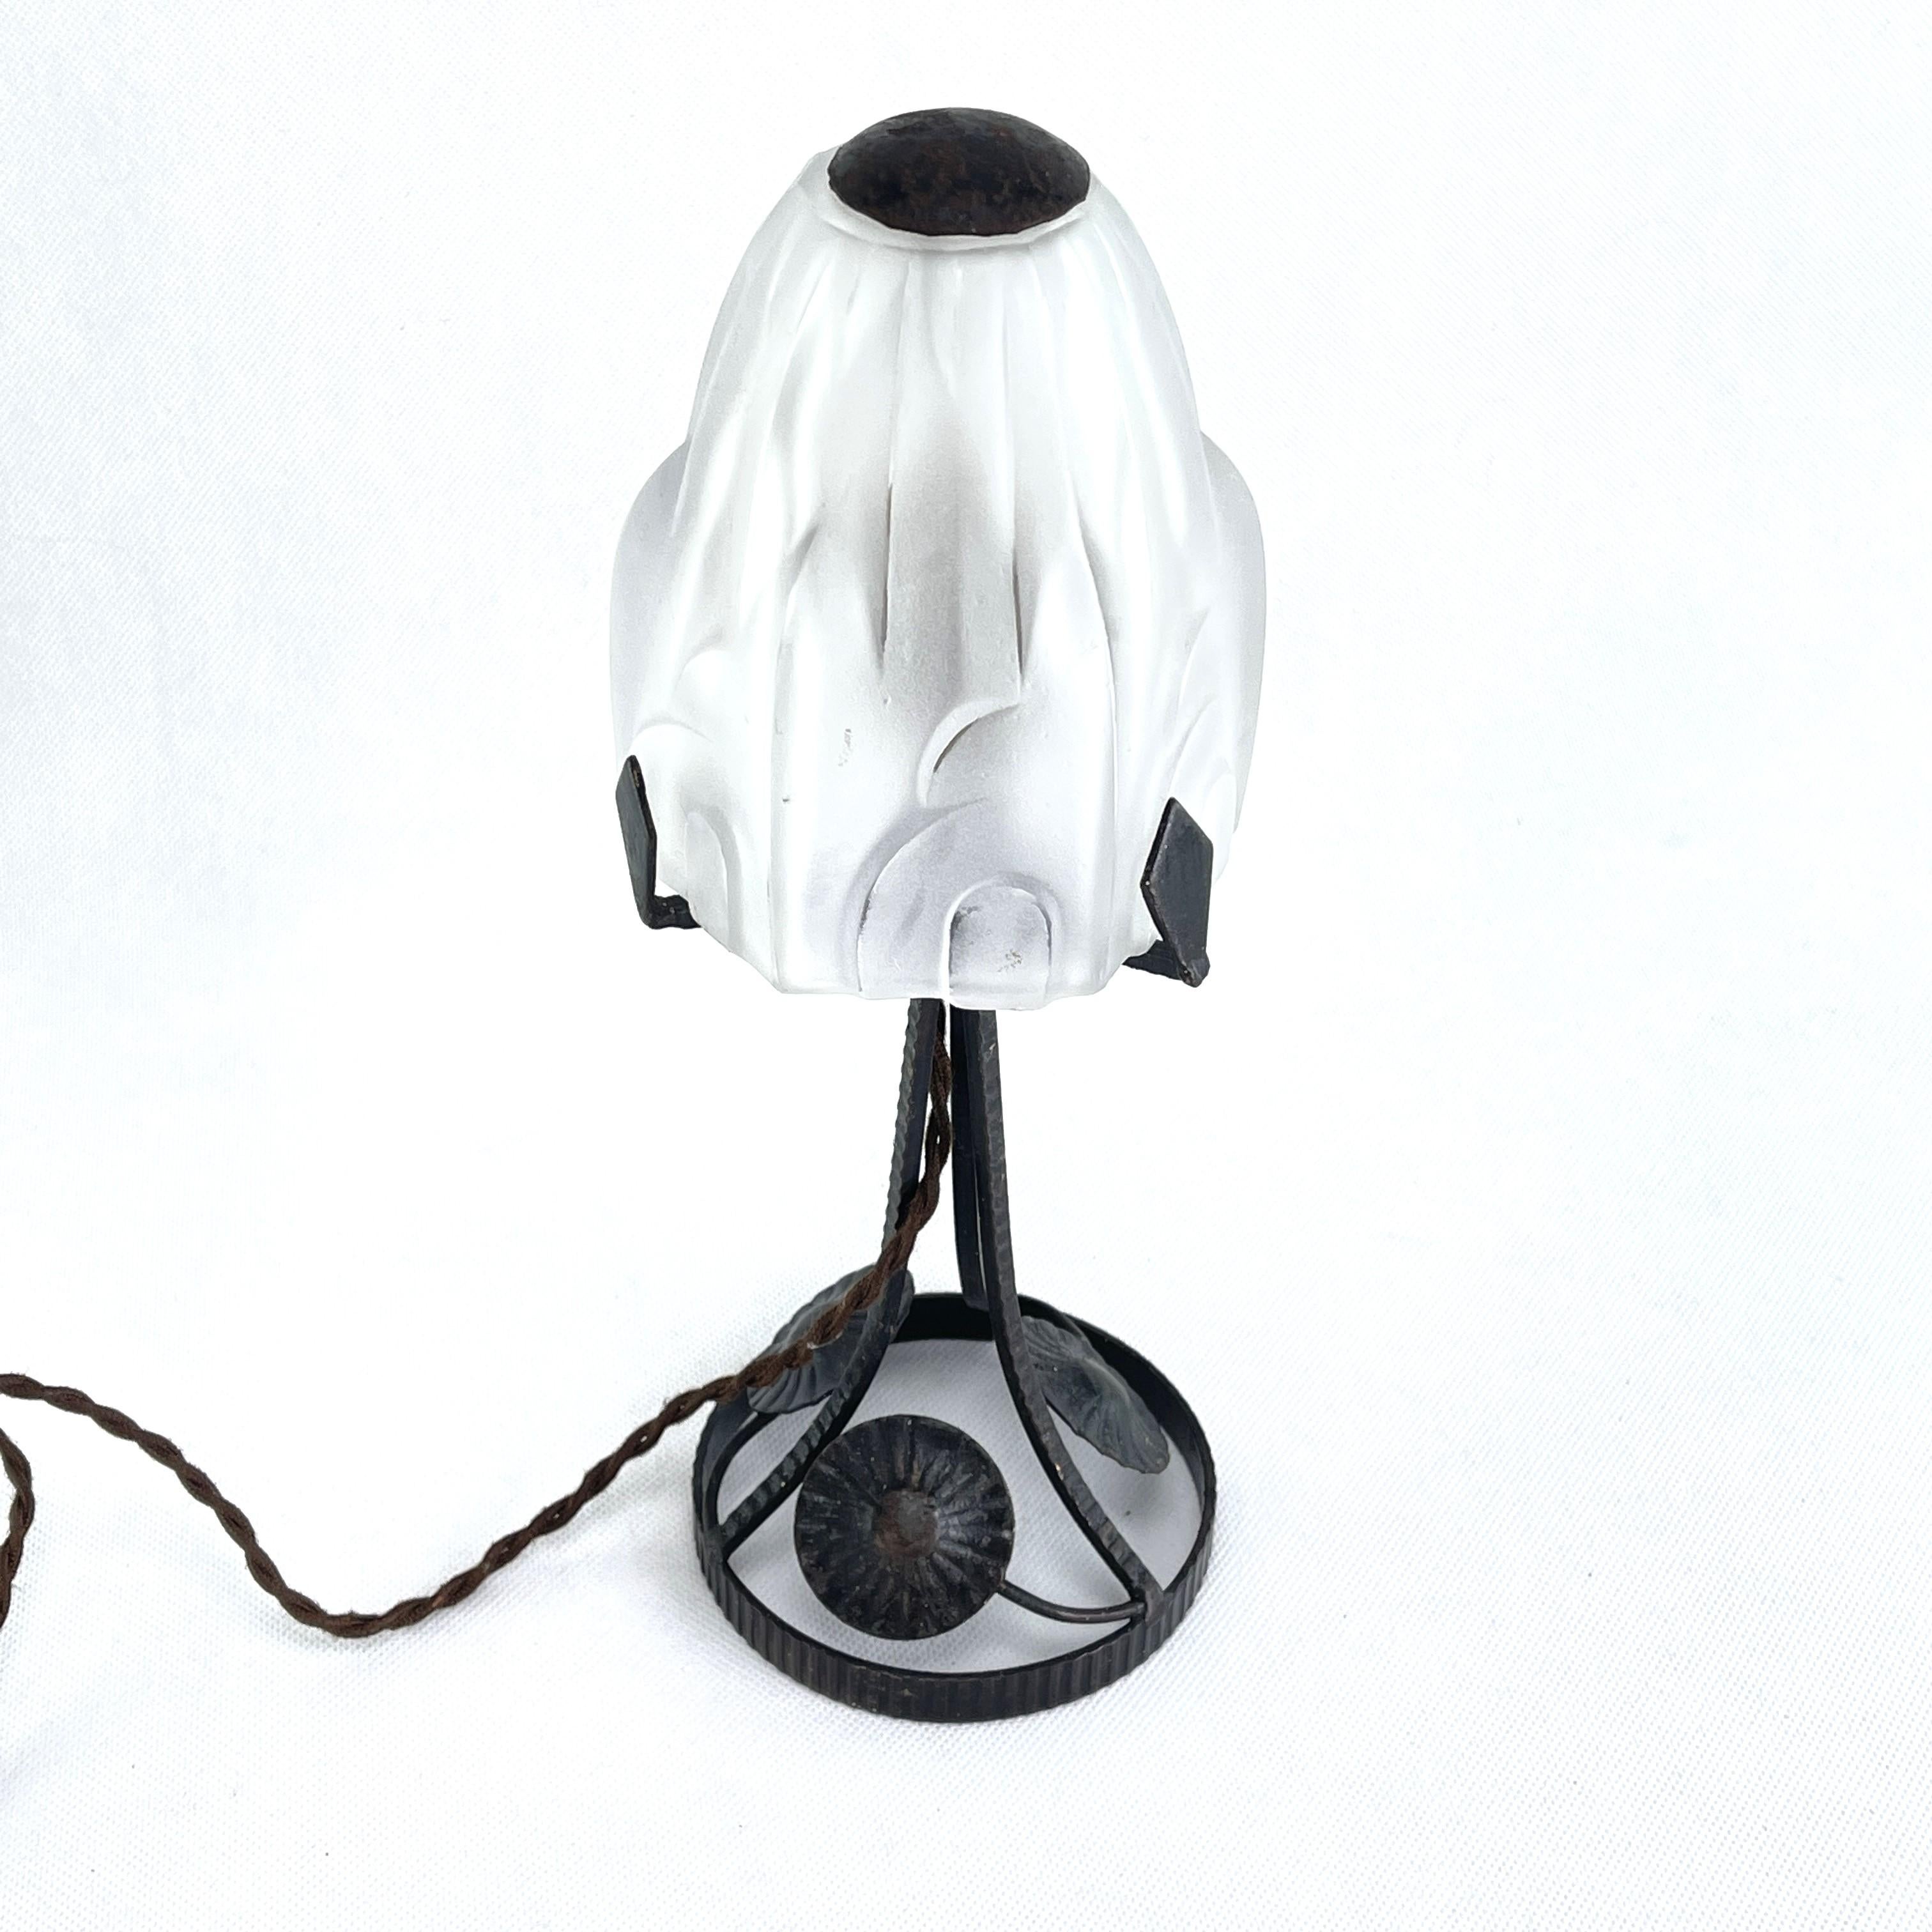 Art Deco Table Lamp - 1930s

A wonderful French 1930s Art Deco table lamps. The lamp has a black metal base and a pressed glass lampshade. This table lamp is an absolute design classic from the ART DECOS period.

The lamp gives a very pleasant